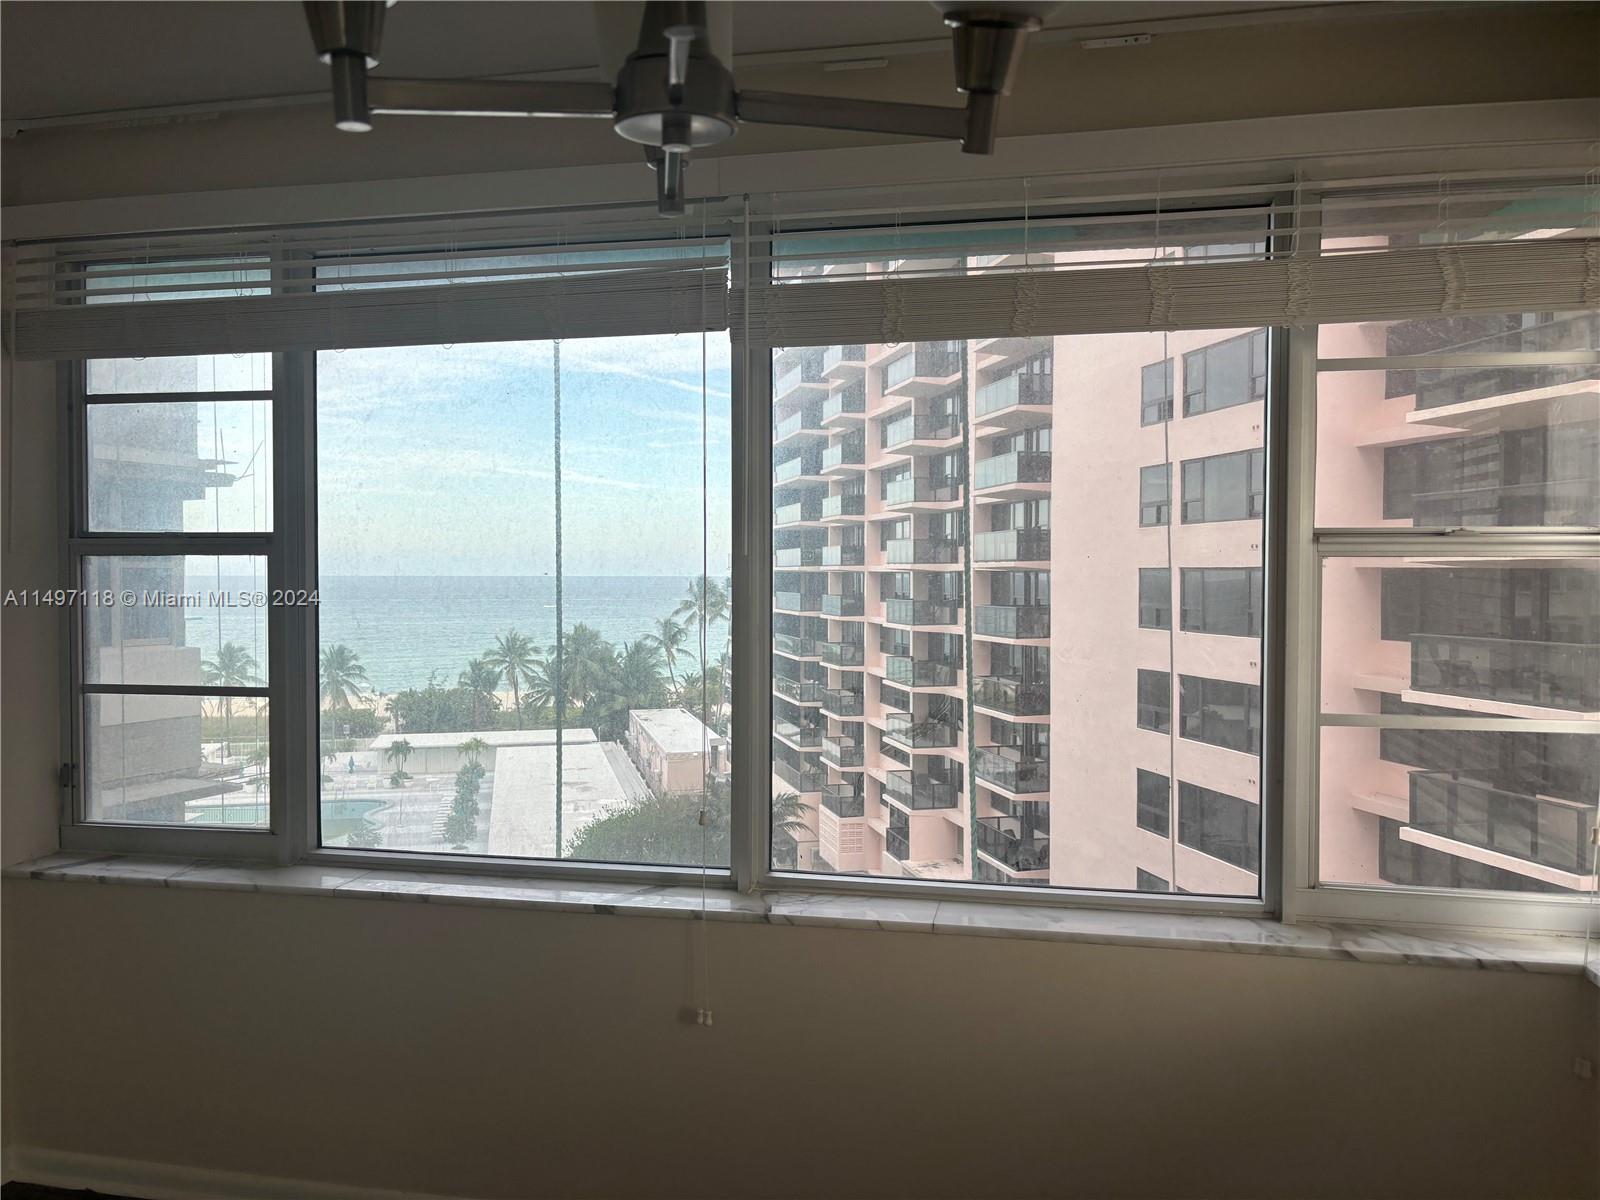 6 months minimum.  Large 2 bdrm/2.5 bath unit at Imperial House.  Includes all utilities: electricity, basic cable, internet, water. waste/sewer.  Amazing sunrise and sunset views. Direct beach access.  Excellent bldg management & staff.